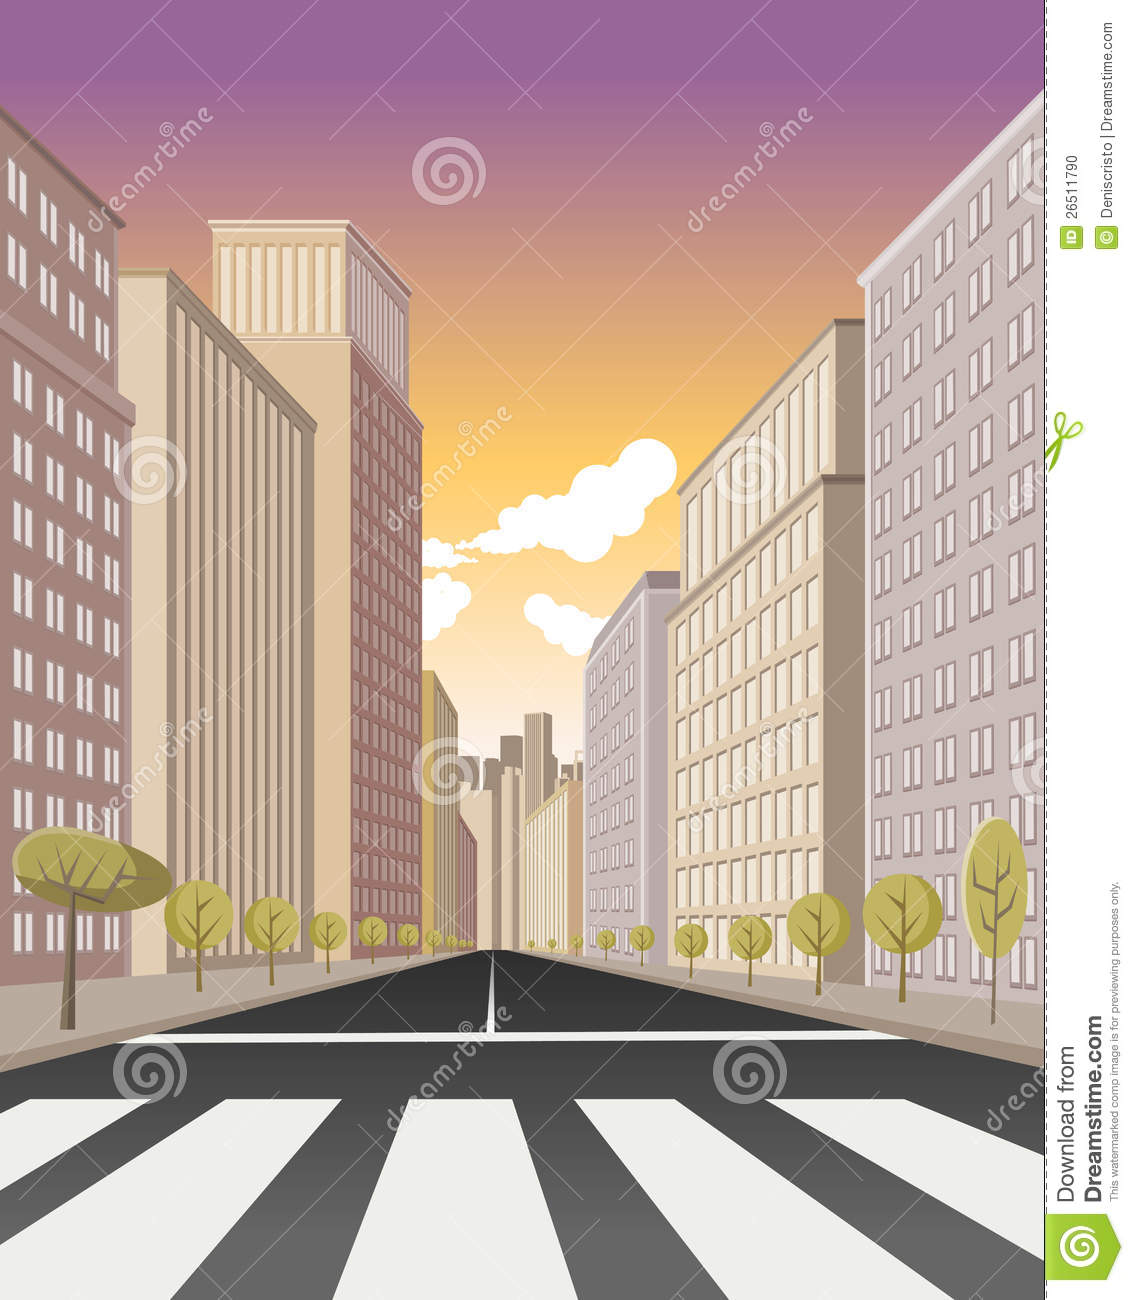 Pedestrian Crossing On The Street Of Downtown City With Buildings 